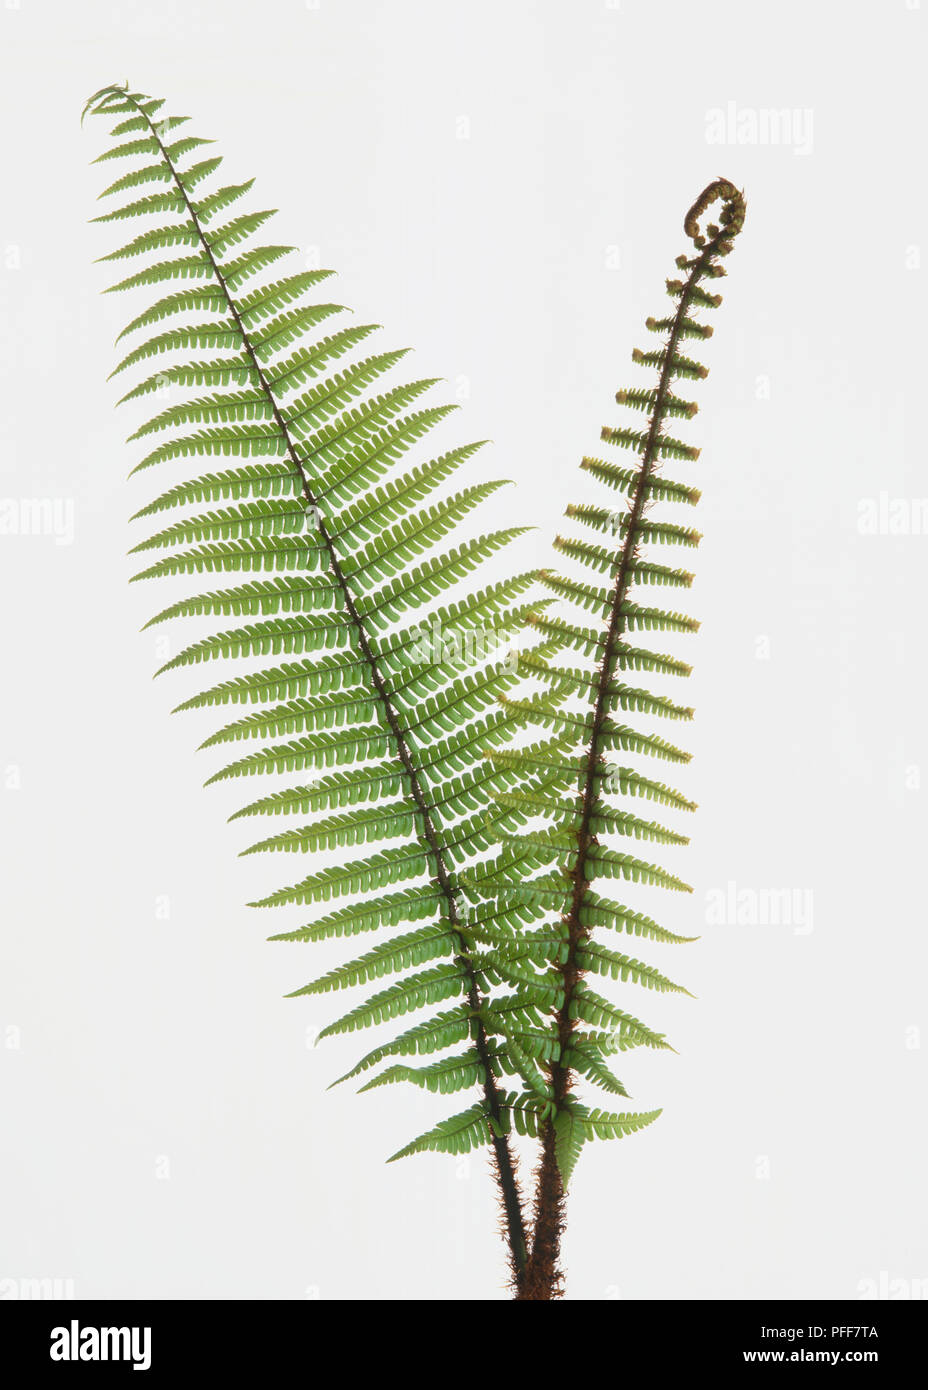 Wllich's Wood Fern, Dryopteris wallichiana, two stalks with light green shuttlecock shaped leaves, front view. Stock Photo